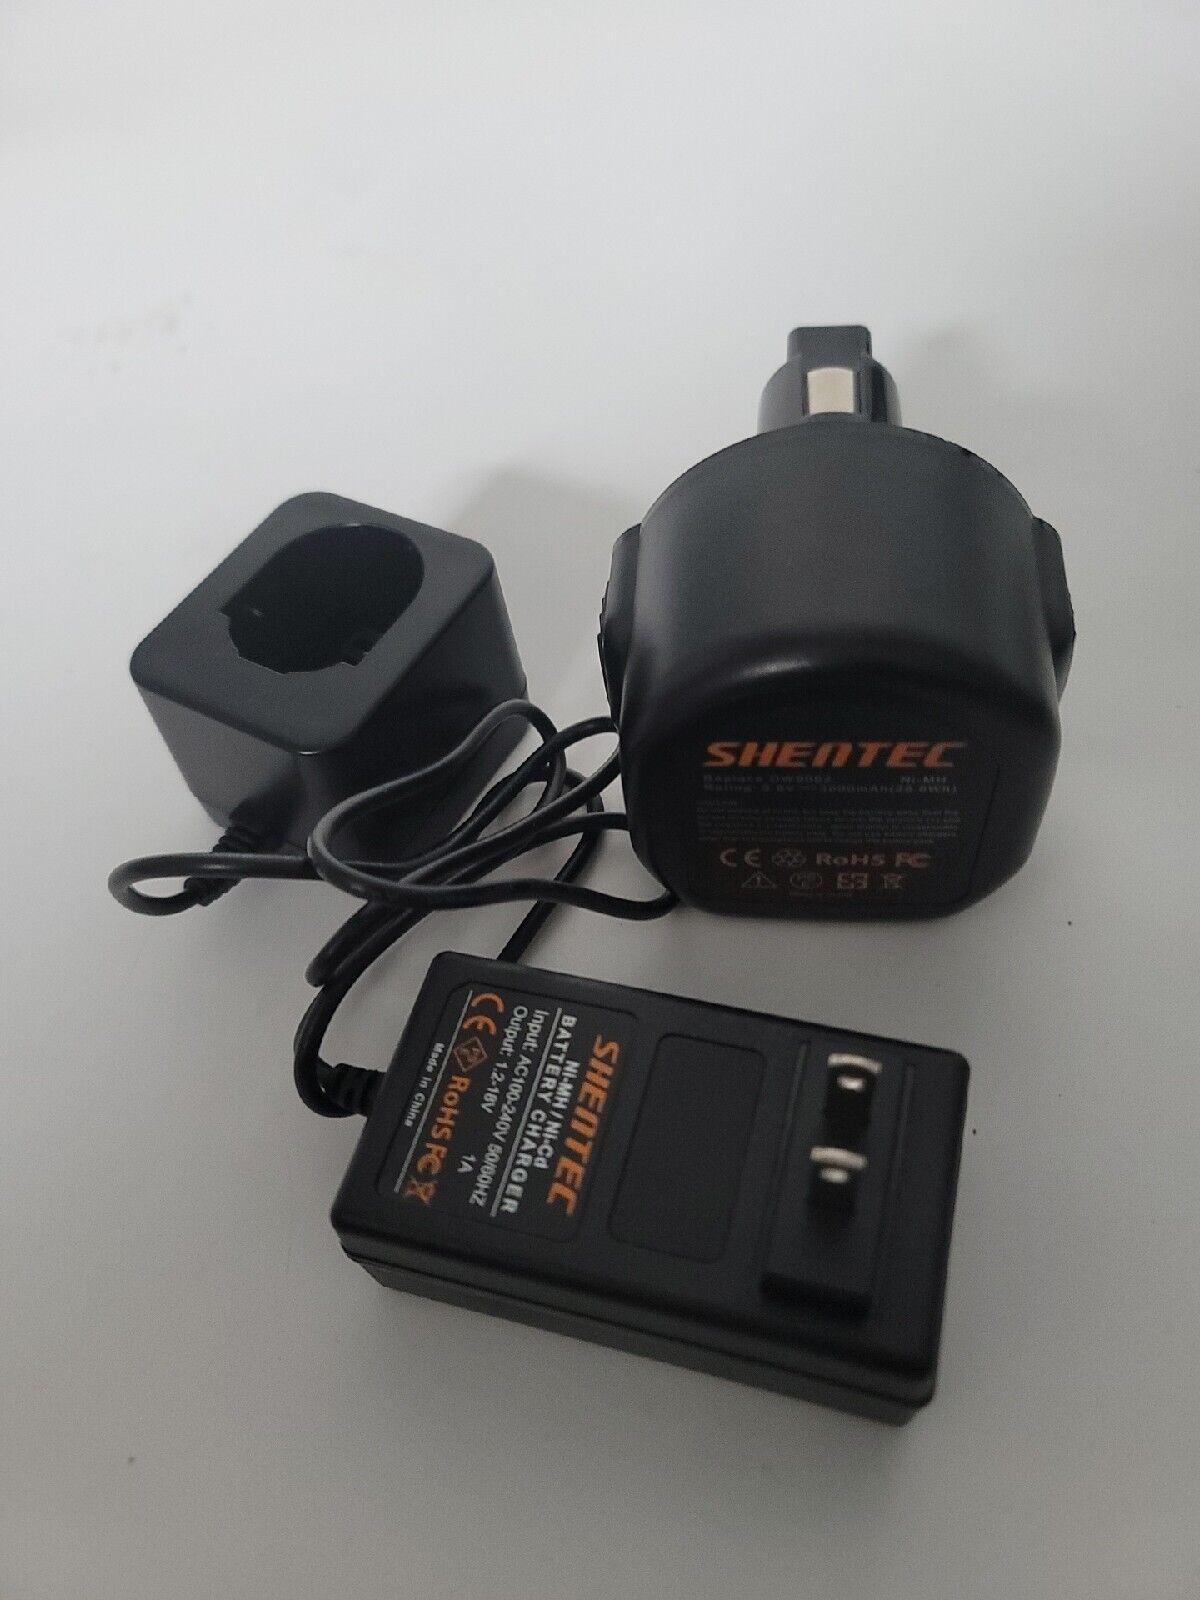 Shentec 9.6V 3.0Ah Replacement battery& Charger for dw9062 Cordless Drill - Opticdeals